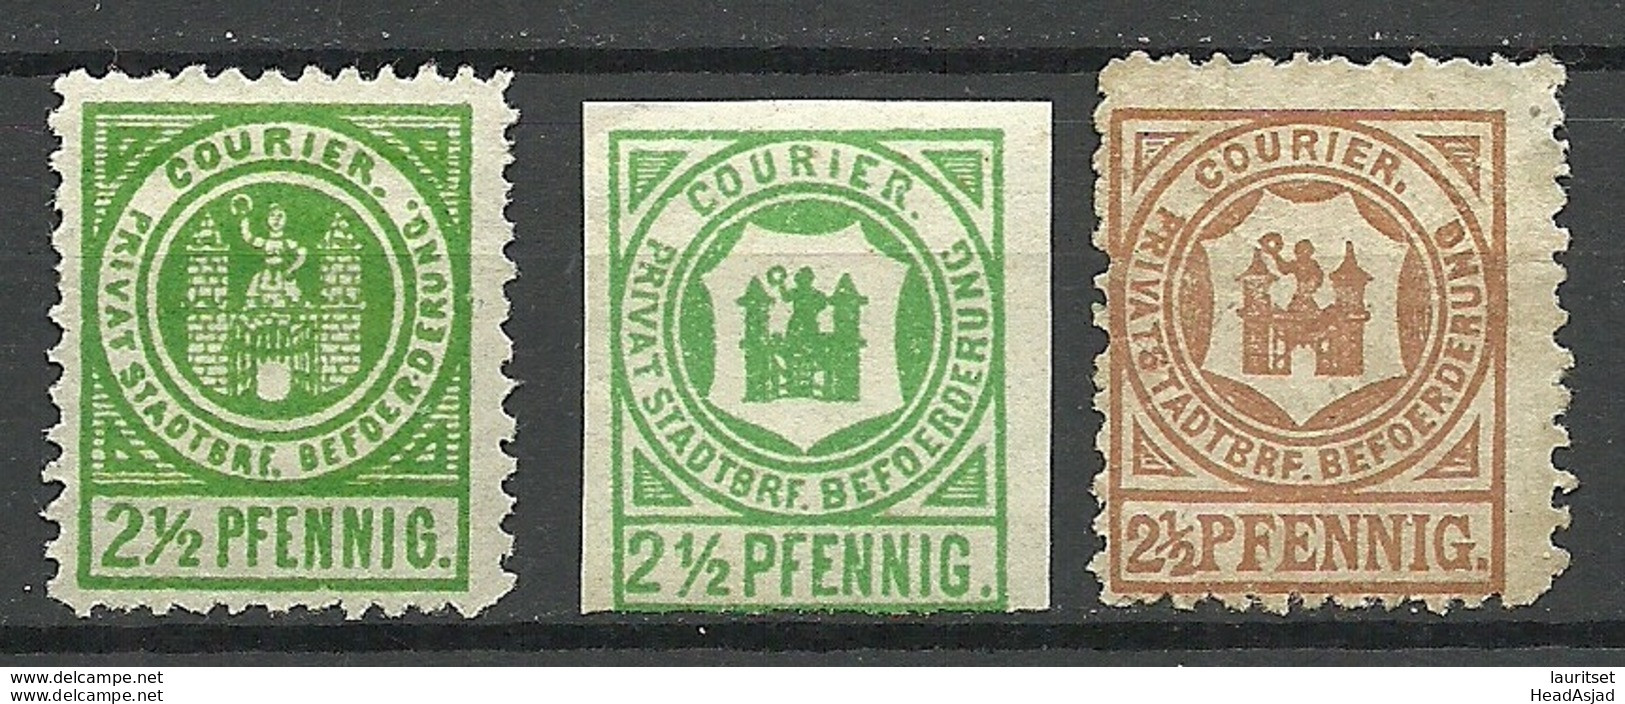 GERMANY O 1890 BREMEN ? Privater Stadtpost Local City Post - Postes Privées & Locales